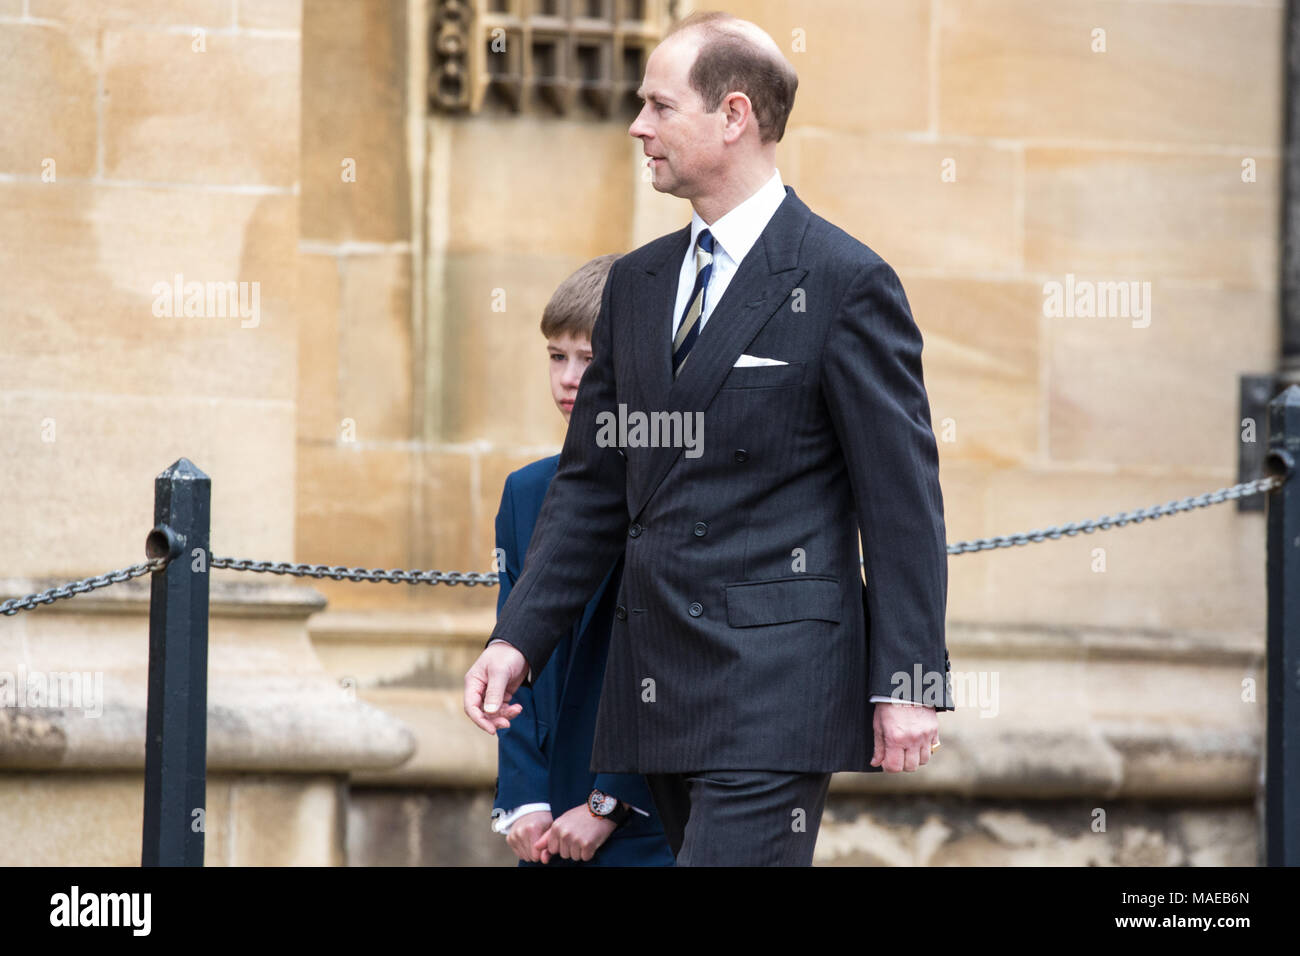 Windsor, UK. 1st April, 2018. Prince Edward, the Earl of Wessex, arrives to attend the Easter Sunday service at St George's Chapel in Windsor Castle with his son James, Viscount Severn. Credit: Mark Kerrison/Alamy Live News Stock Photo